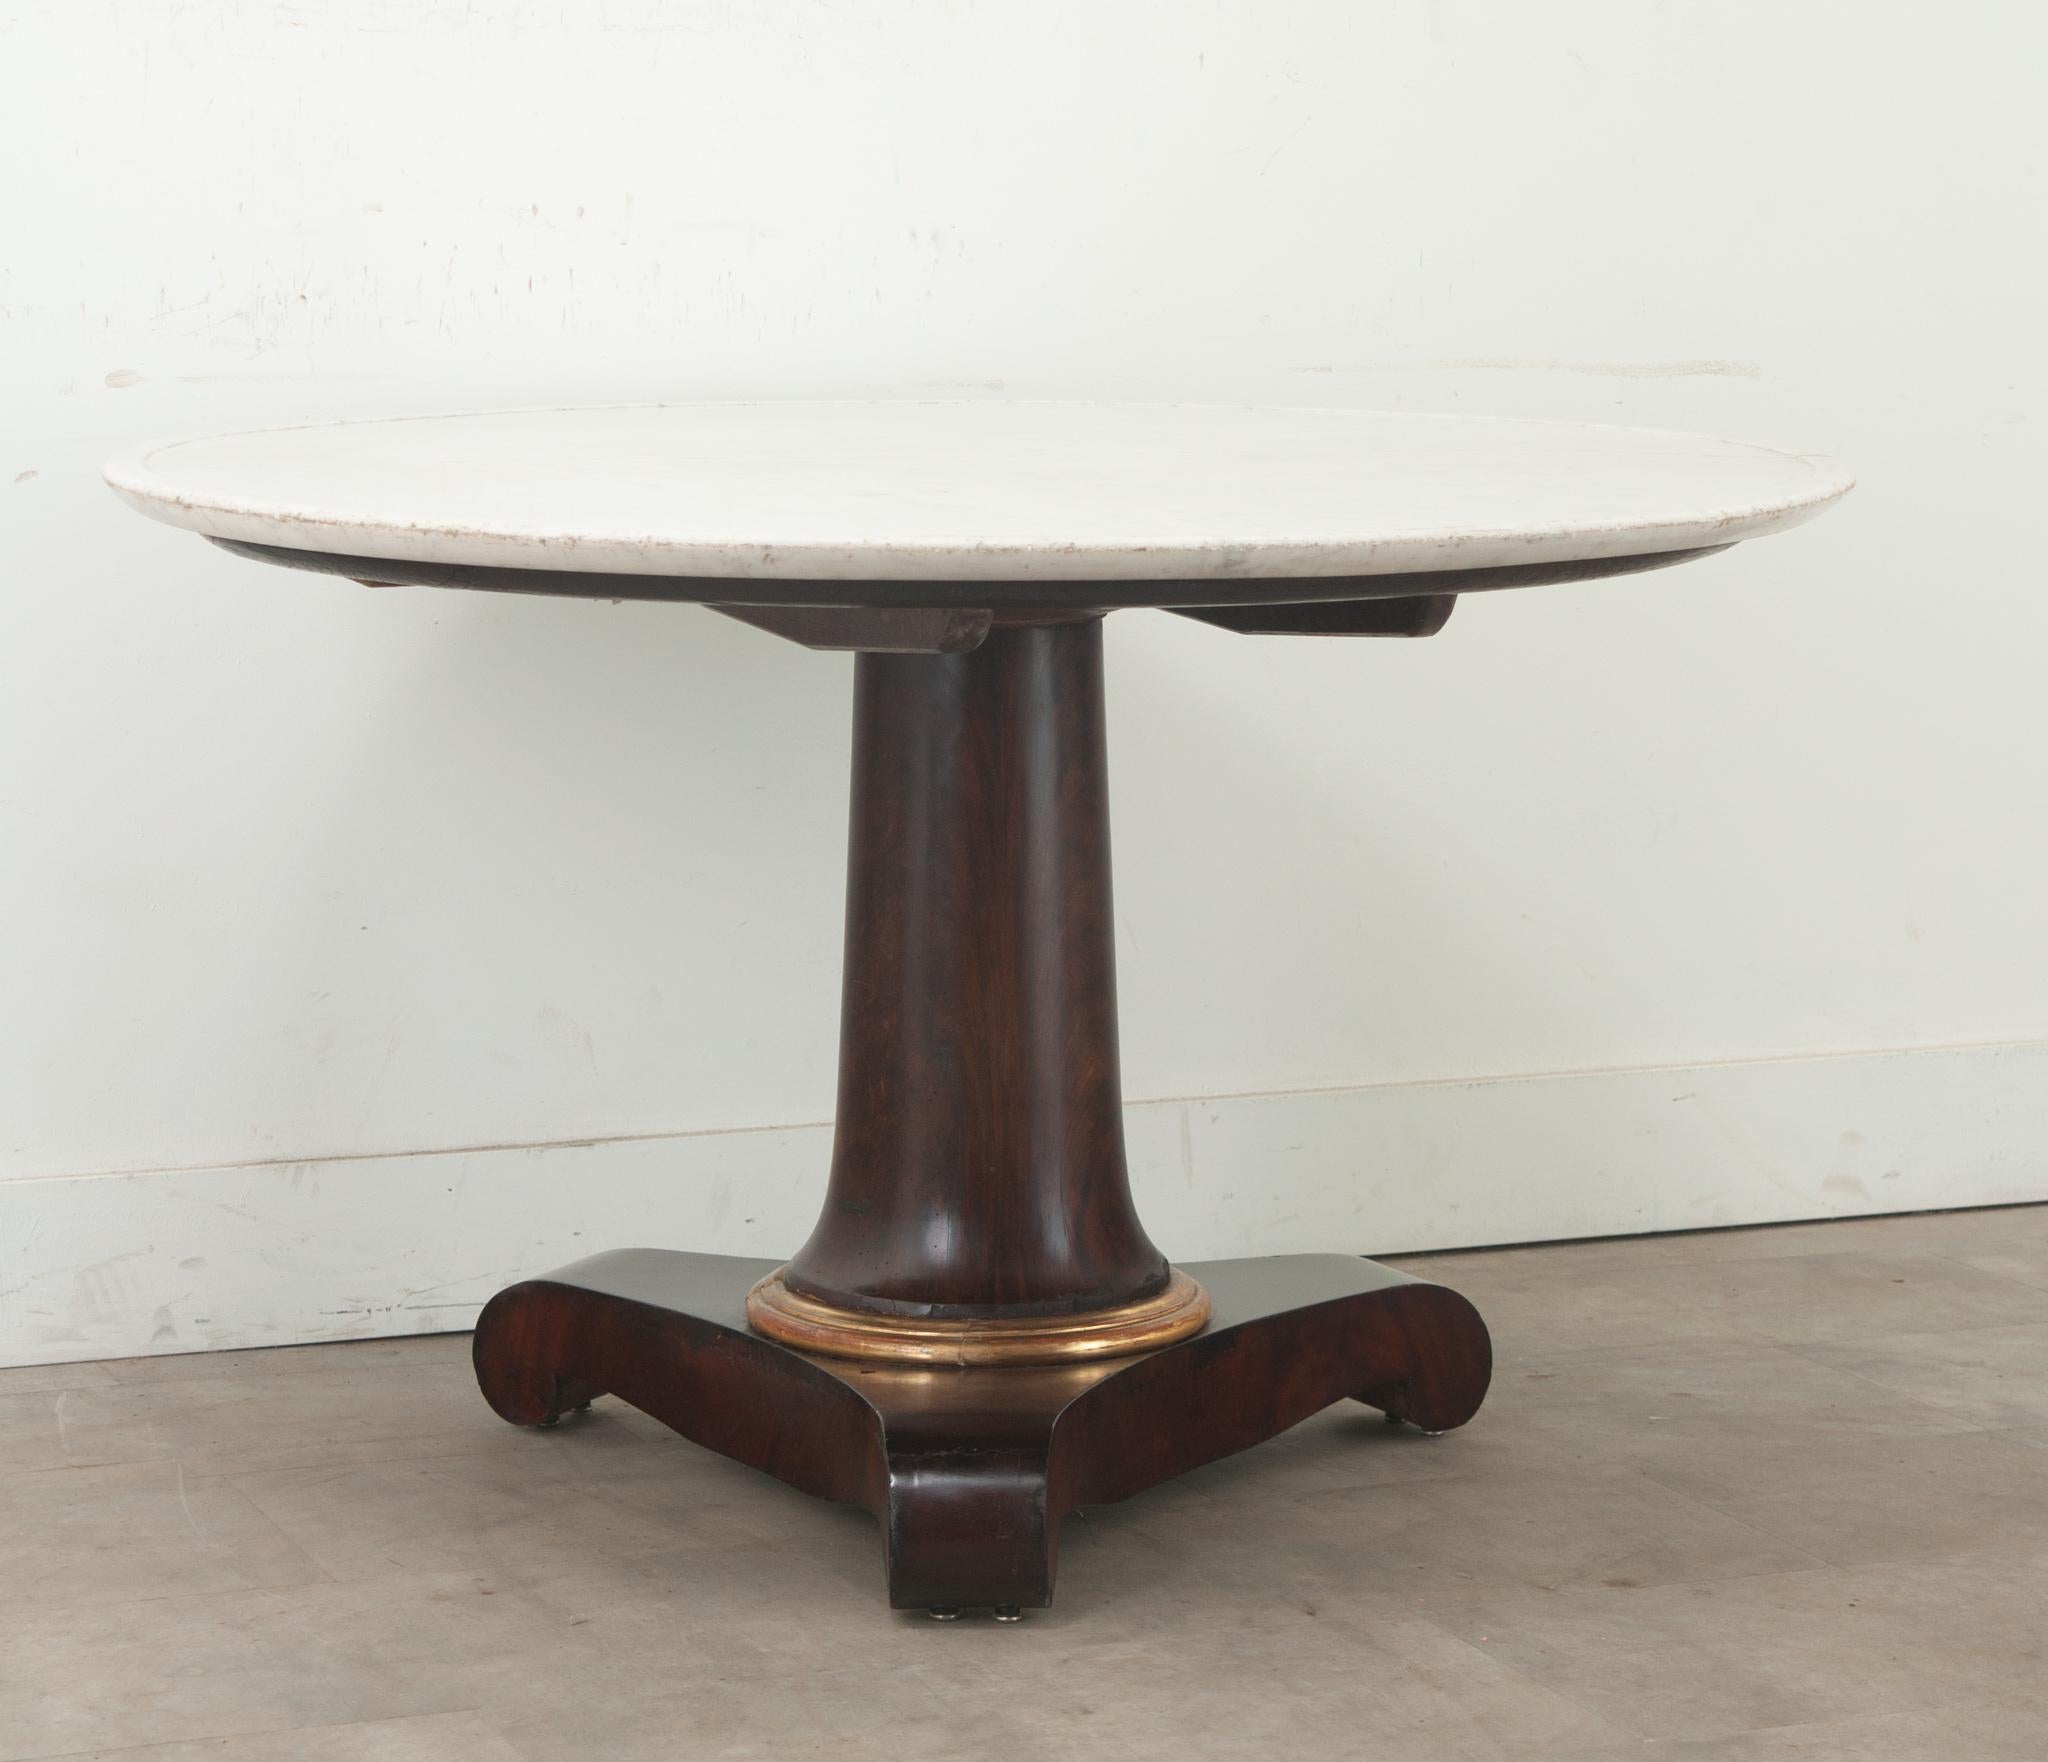 A massive French white marble top Empire Gueridon made of mahogany. The solid pedestal base has a painted and gilt collar above three splayed feet, the whole raised on working casters. The marble has been professionally repaired, be sure to view the